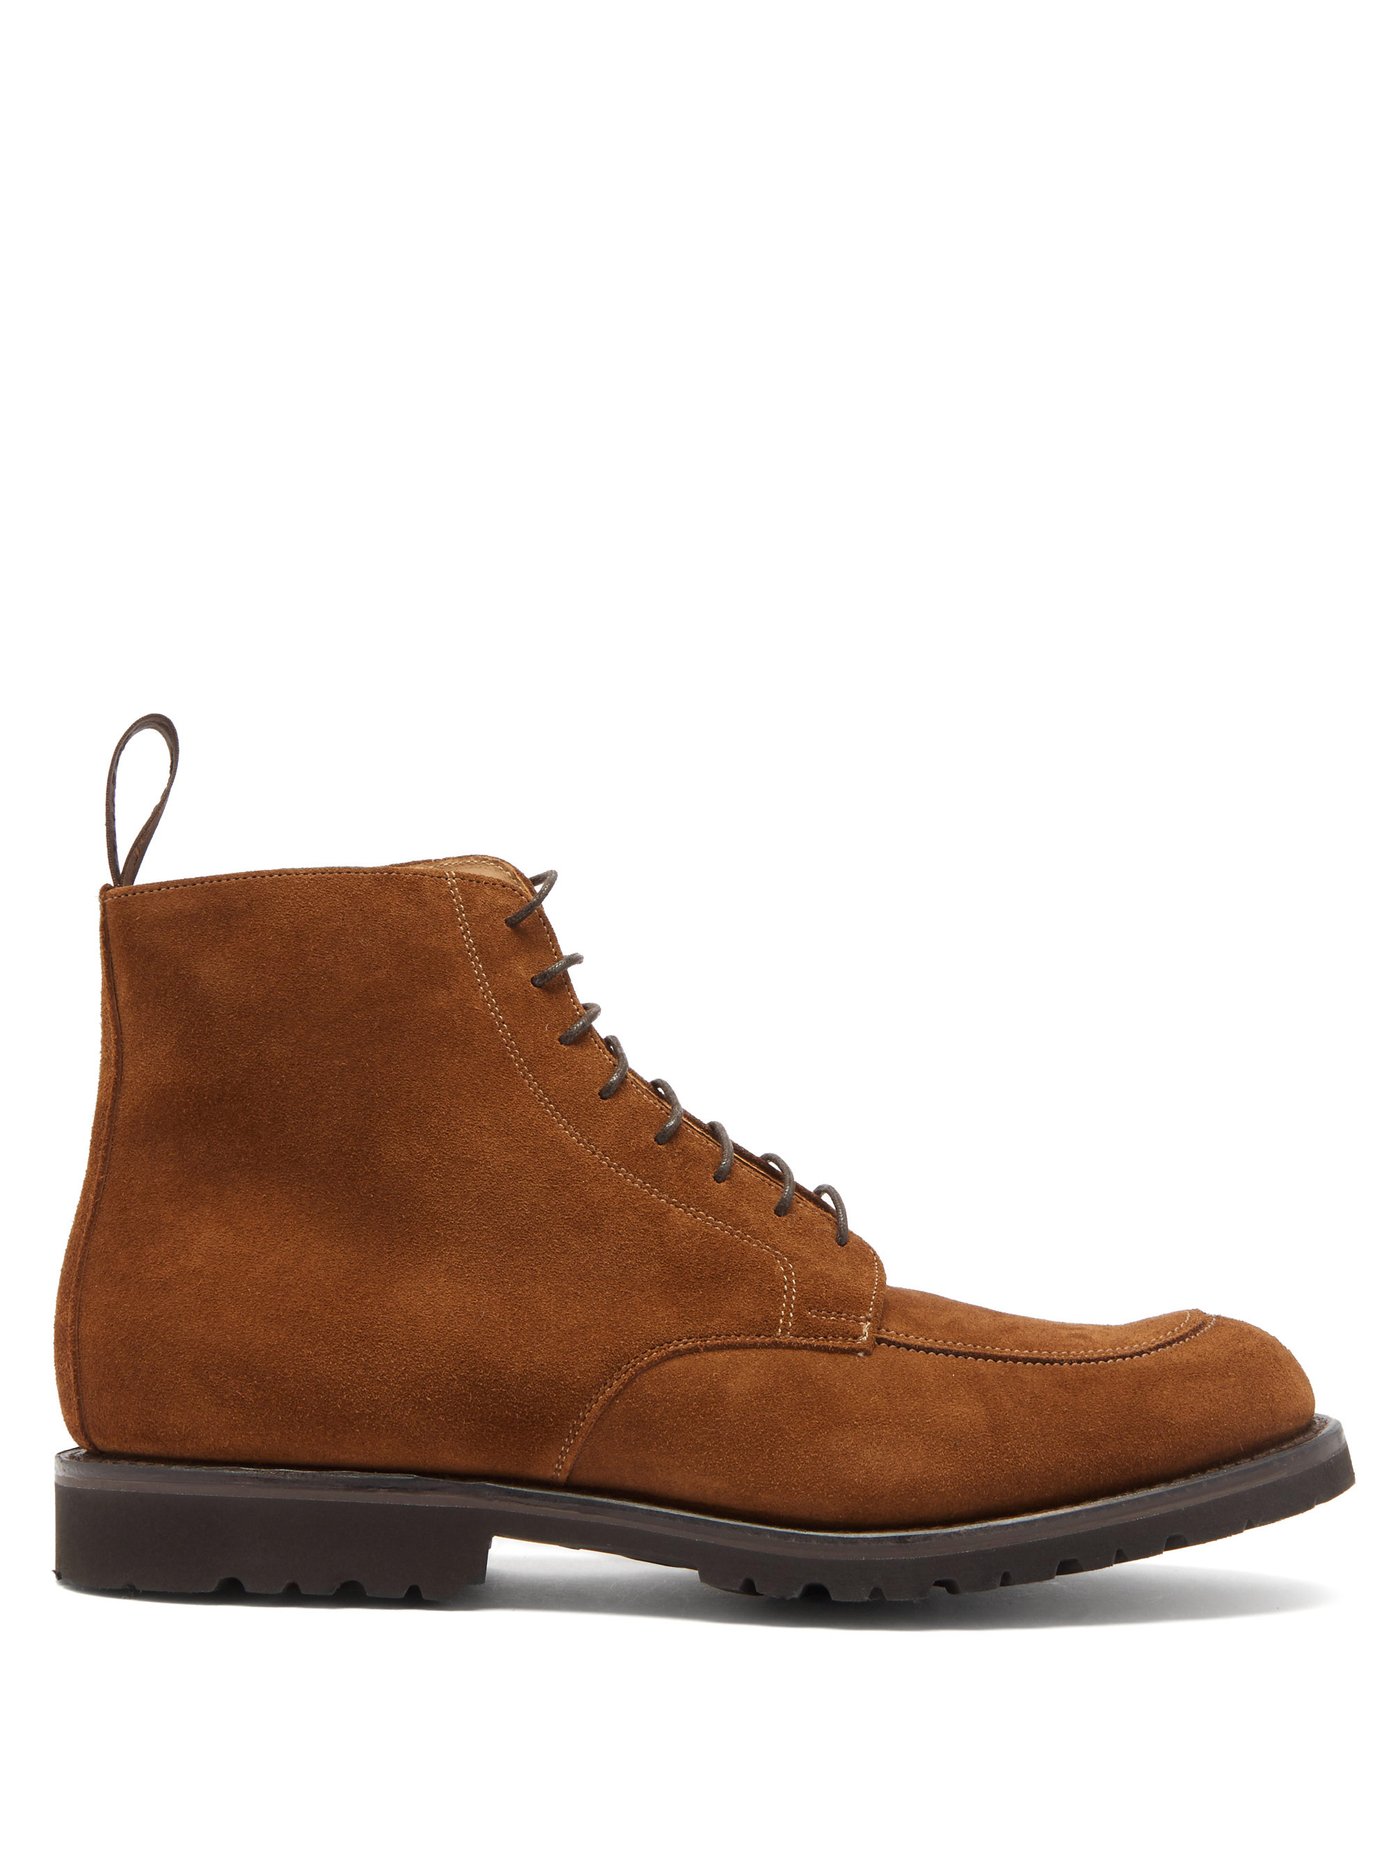 Richmond suede boots | Cheaney 